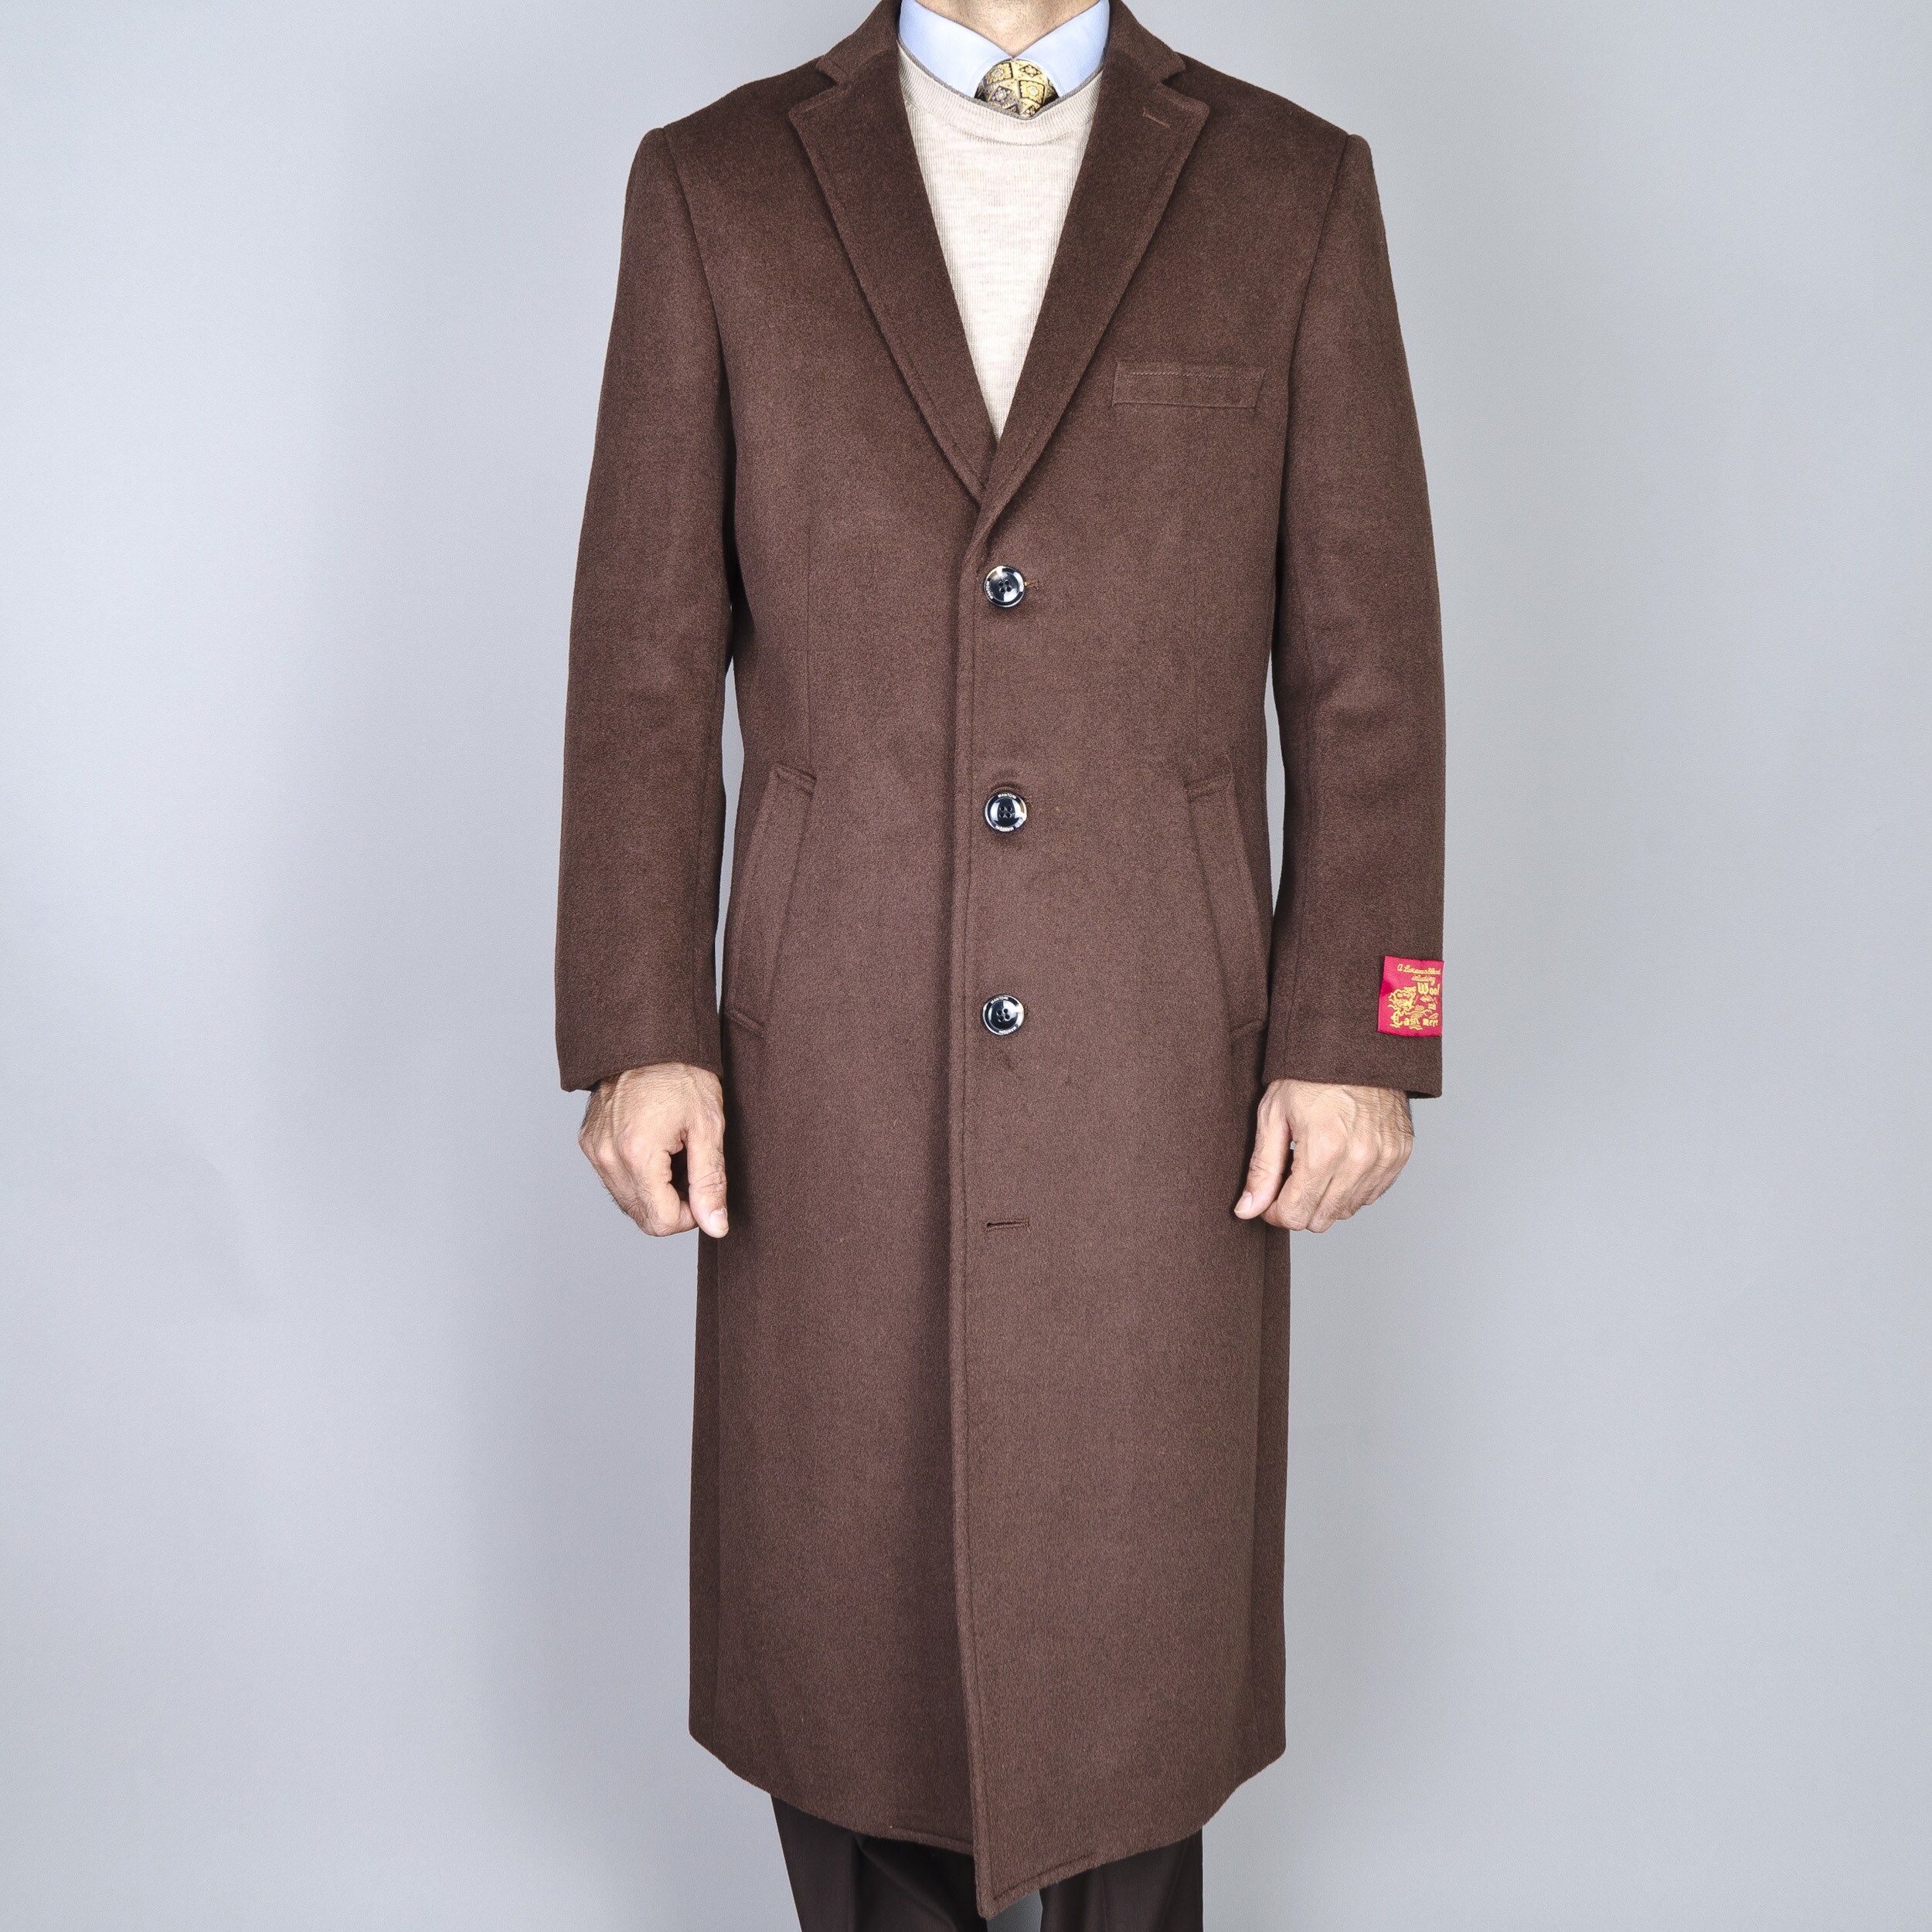 Men's Wool and Cashmere Winter Top Coat - Overstock Shopping - Big ...